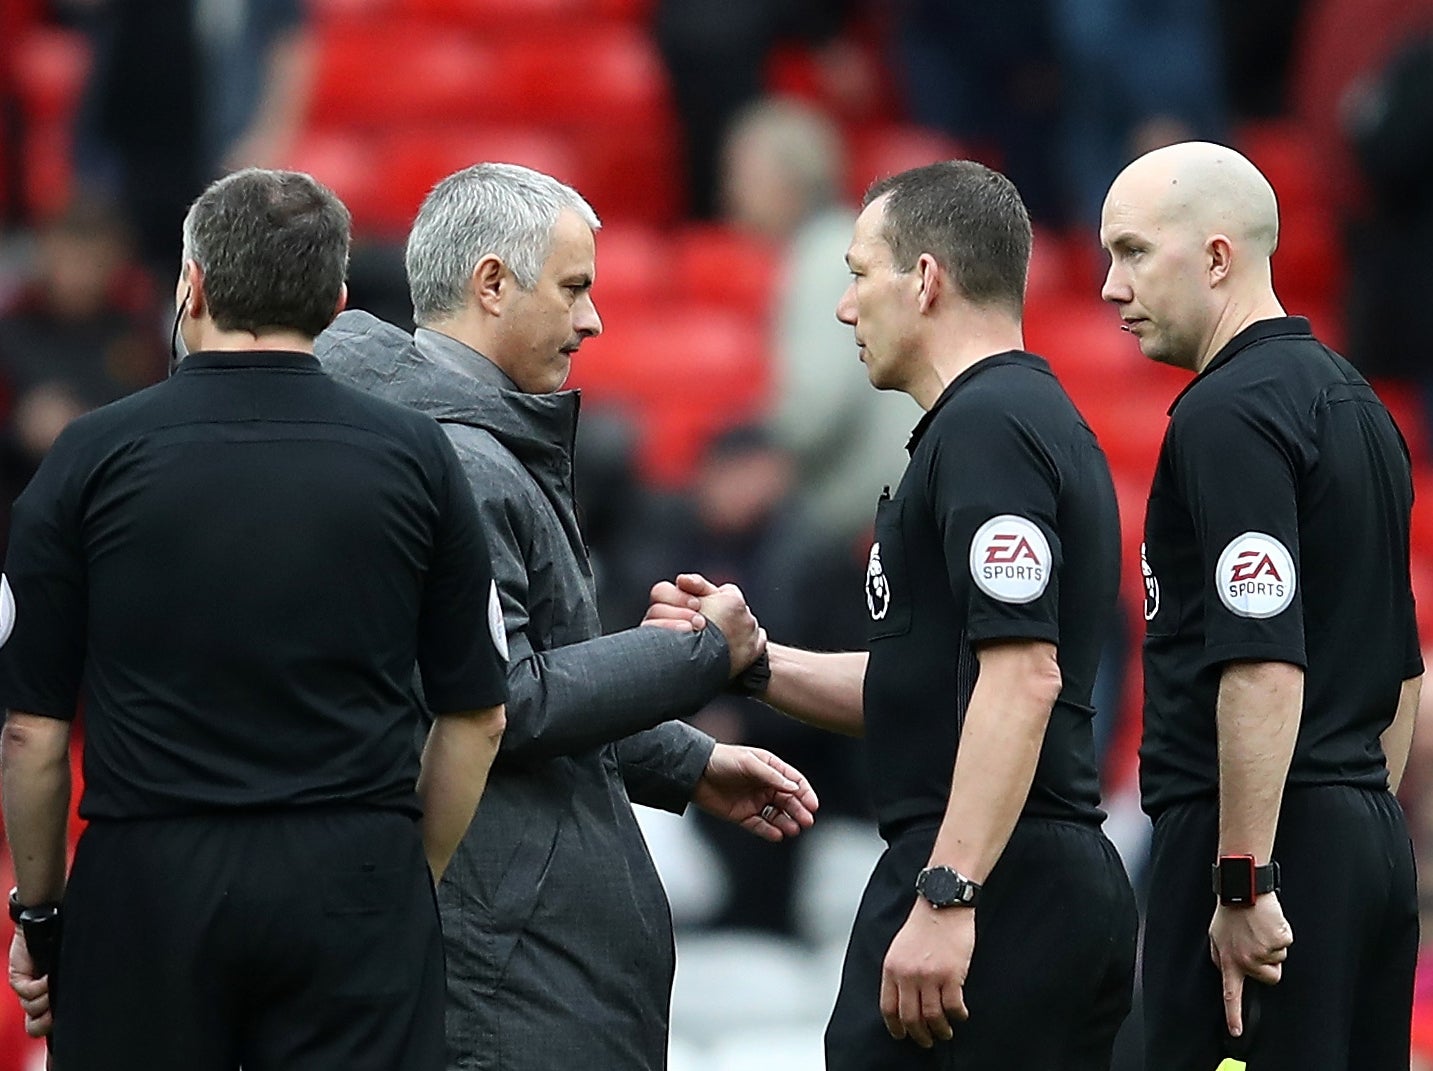 Mourinho shaking the hand of Friend after the match